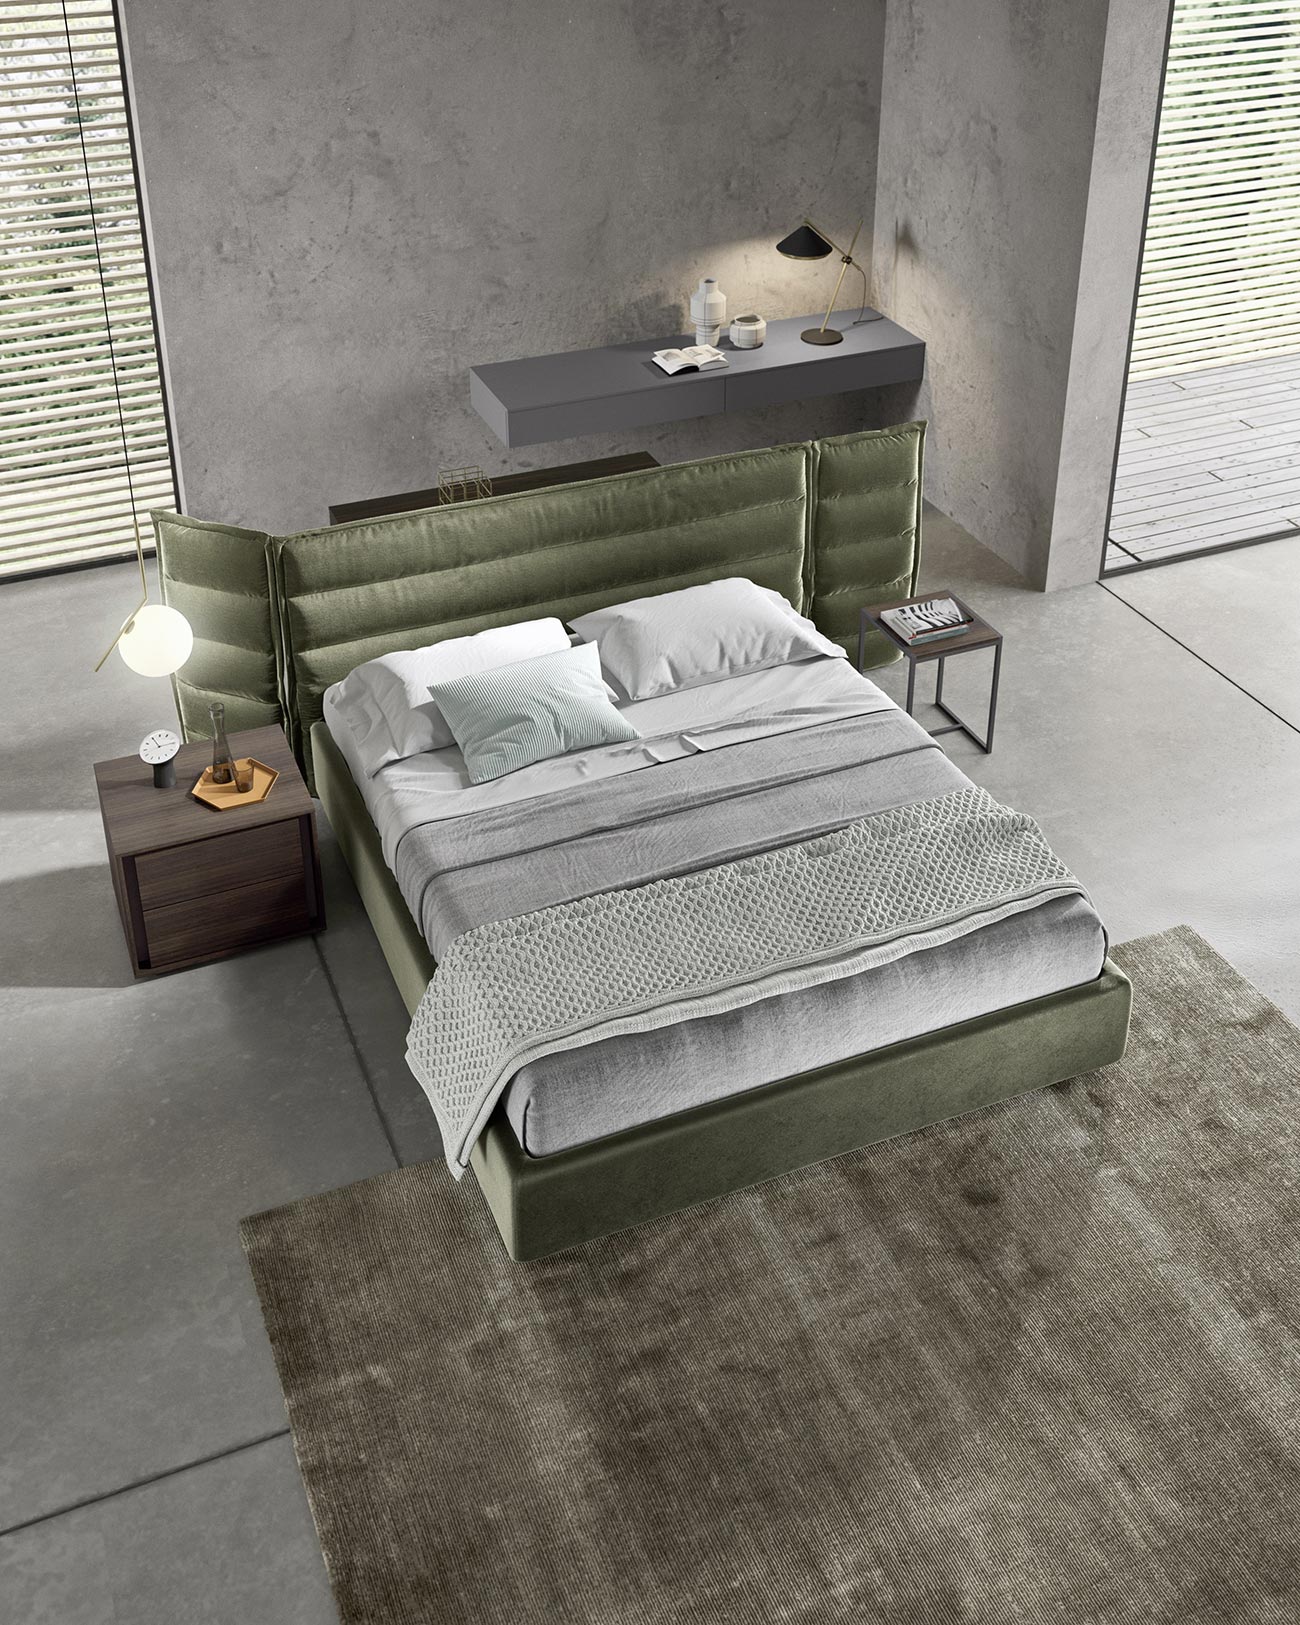 Modern, neat-design double bed